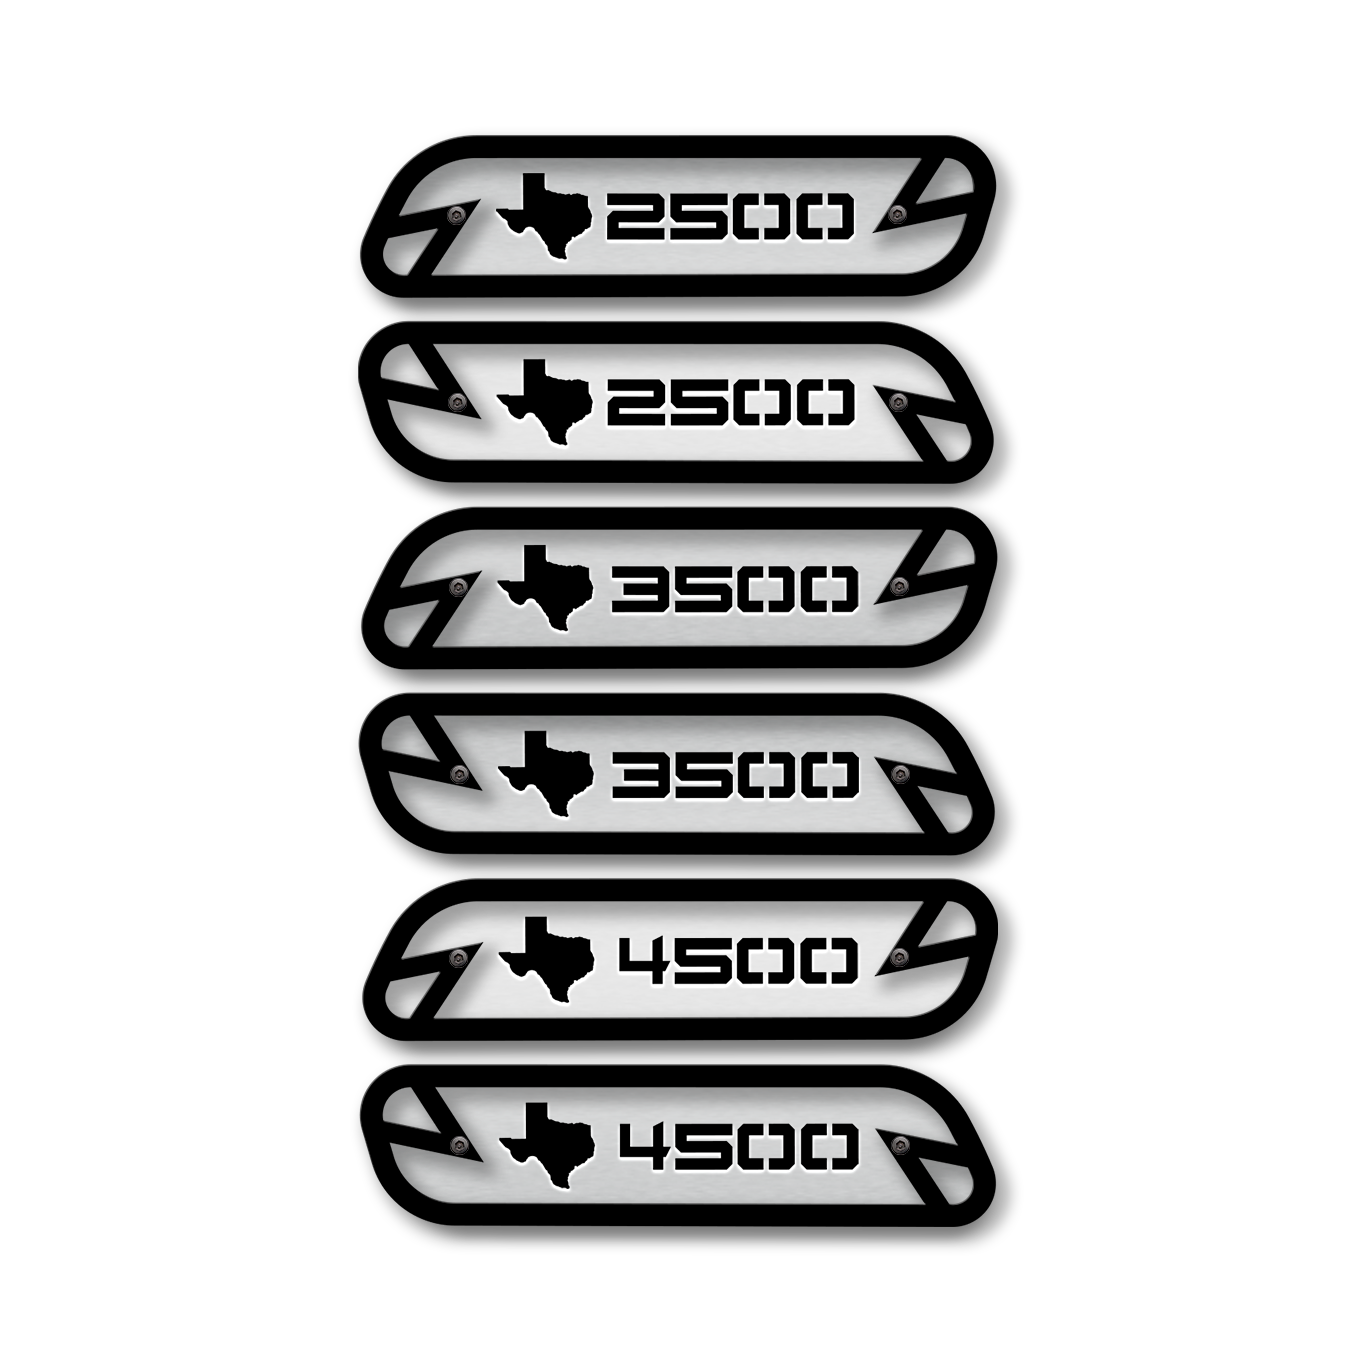 Texas 2500/3500/4500 Hood Emblem Replacements - Fits 2019-2022 Ram® 2500, 3500, 4500 - Fully Customizable, LED or Non-LED